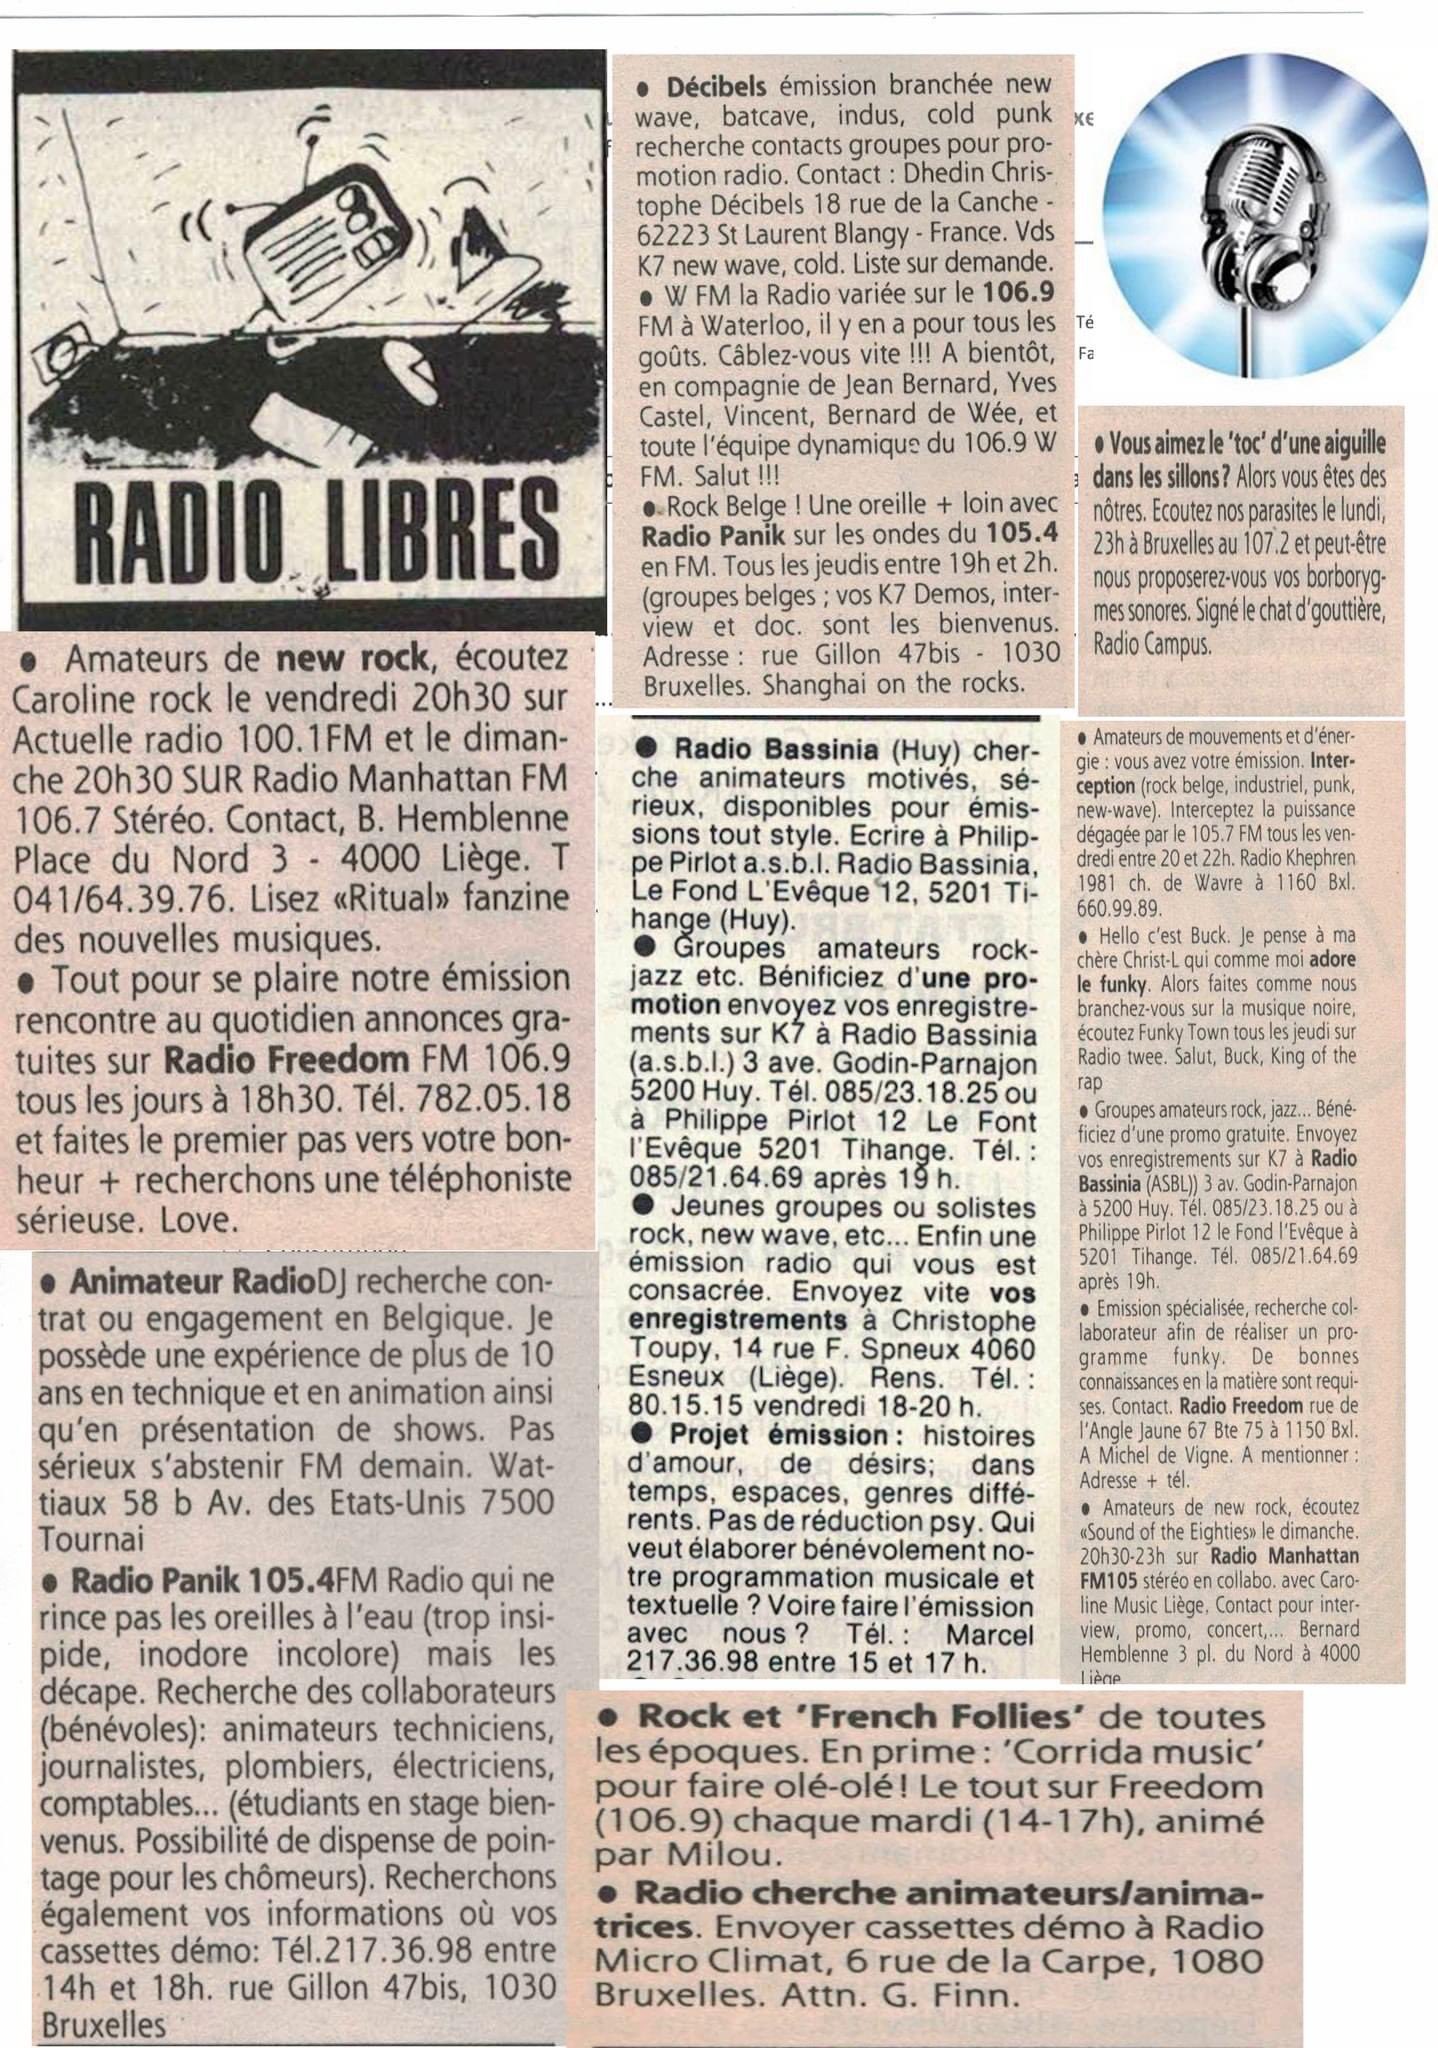 Archives Radios (@ArchivesRadios) / Twitter